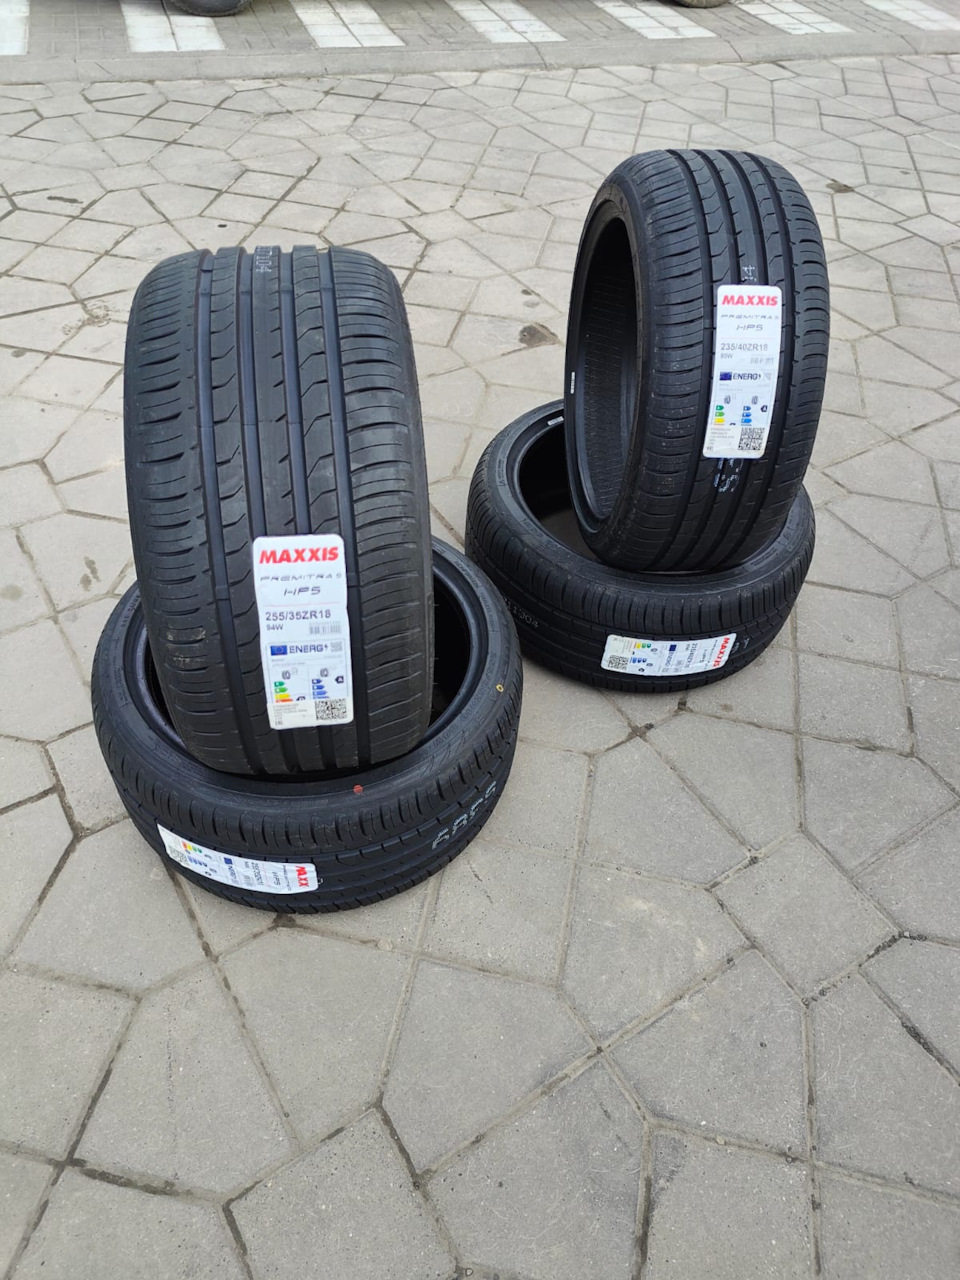 Максис Вектра 225 60 15. Appolo Tyres 4g+ 225 45 r17. 235 45 17 Лето King Boss. Maxxis hp5 205/60 r16. Maxxis premiere hp5 отзывы